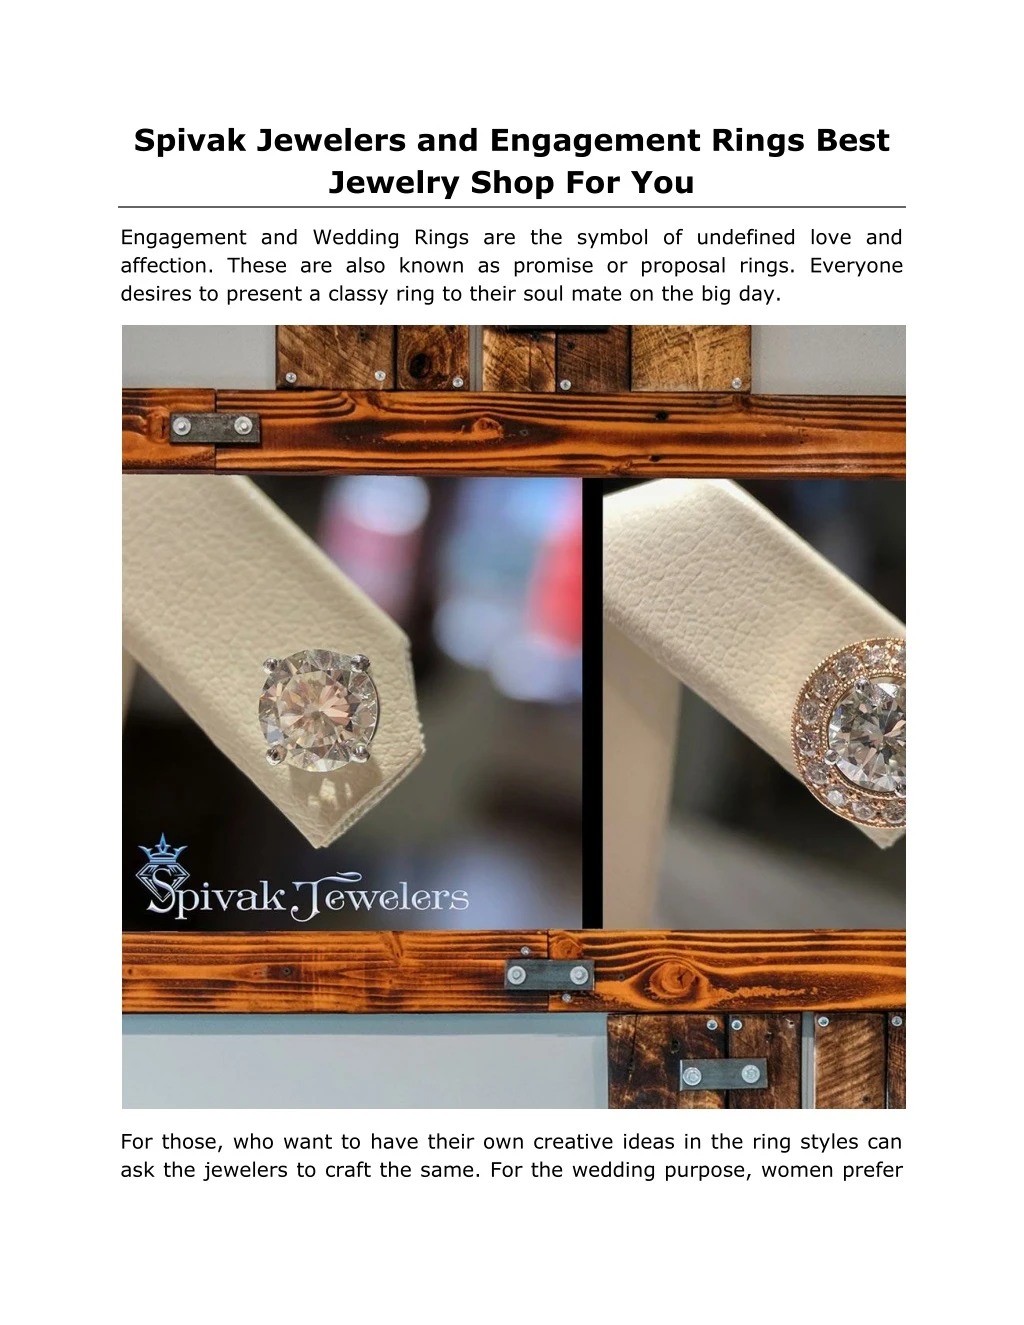 spivak jewelers and engagement rings best jewelry